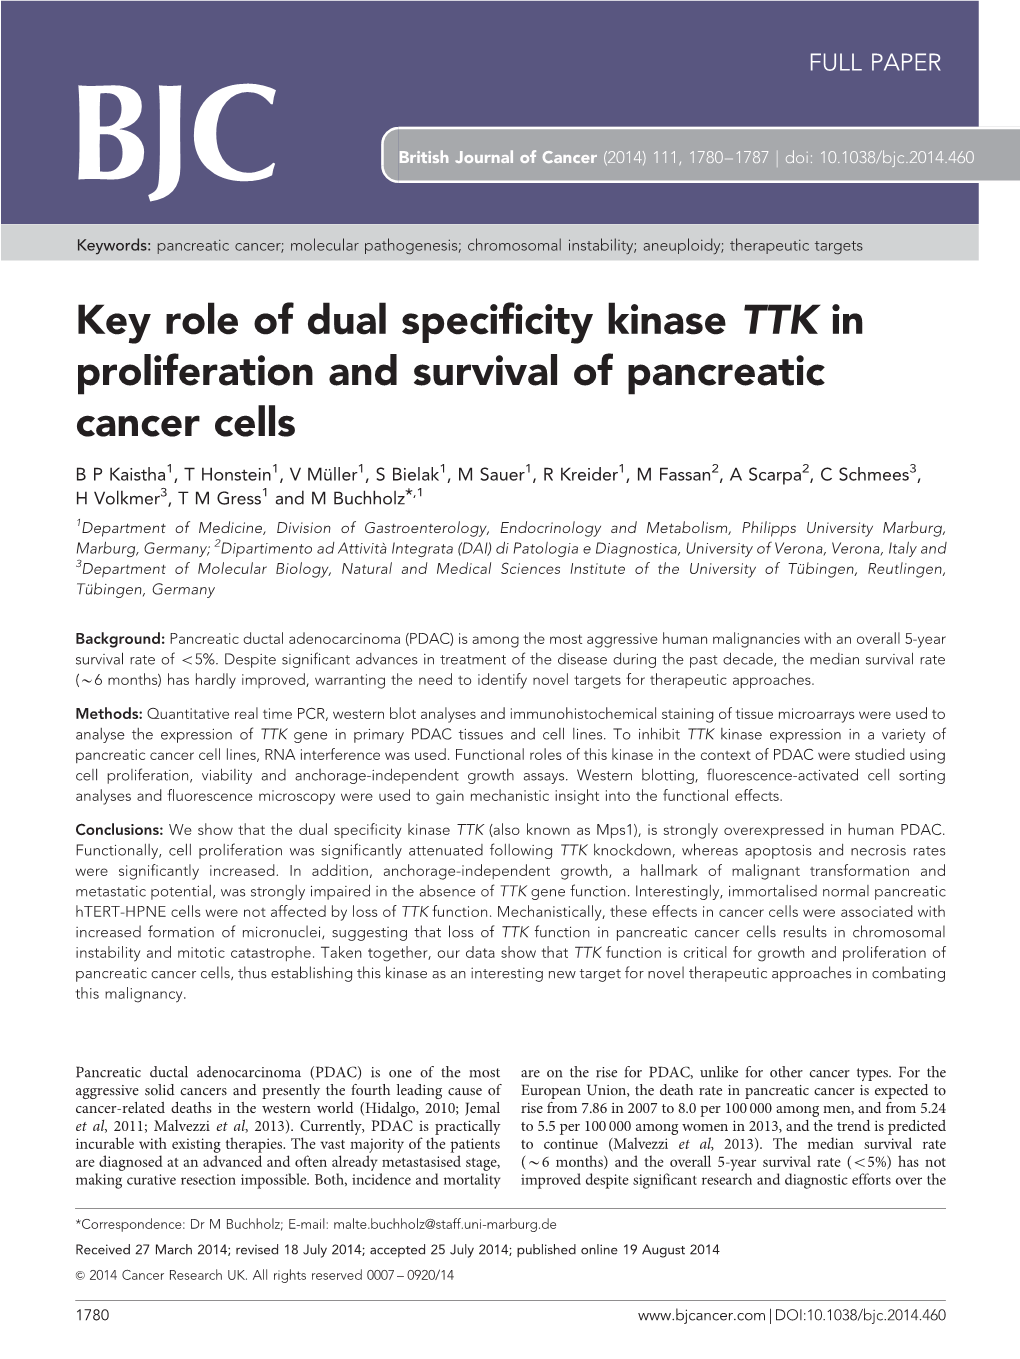 Key Role of Dual Specificity Kinase TTK in Proliferation and Survival of Pancreatic Cancer Cells